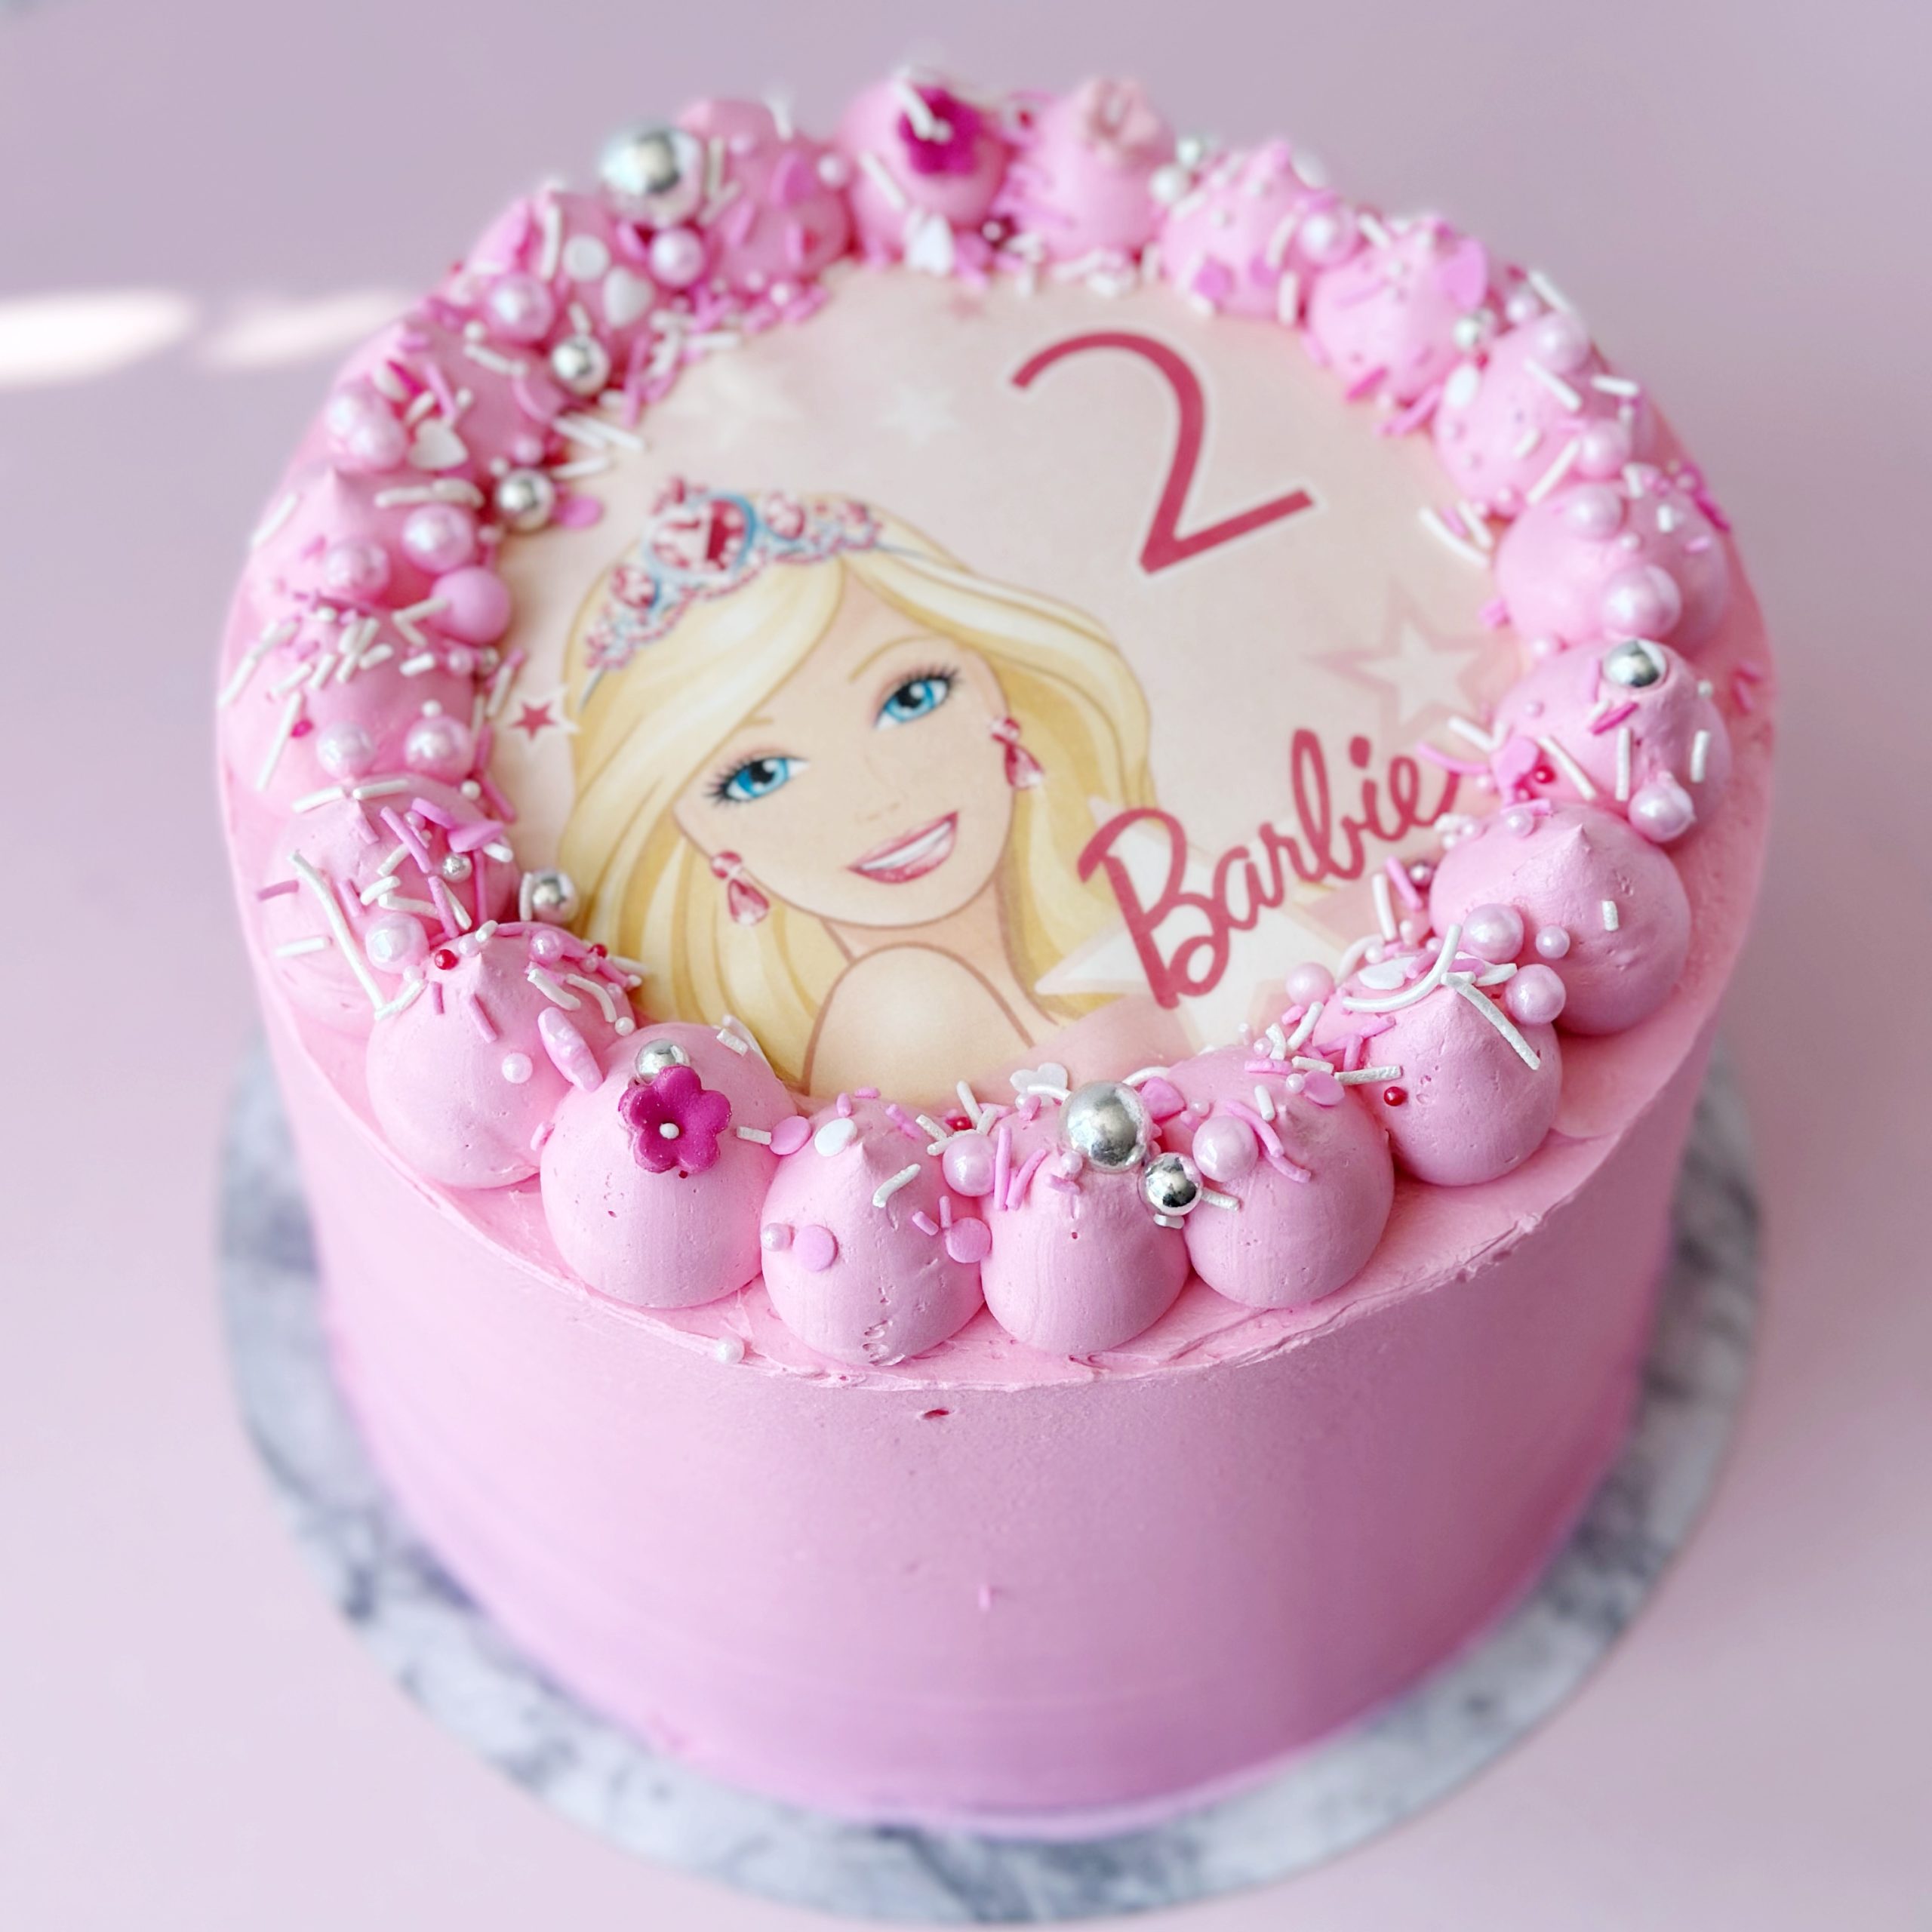 House of chocolates - Barbie doll Birthday Cake is every little girl's  dream. If your little princess is fond of Barbie dolls then you should make  her dreams come true and bring